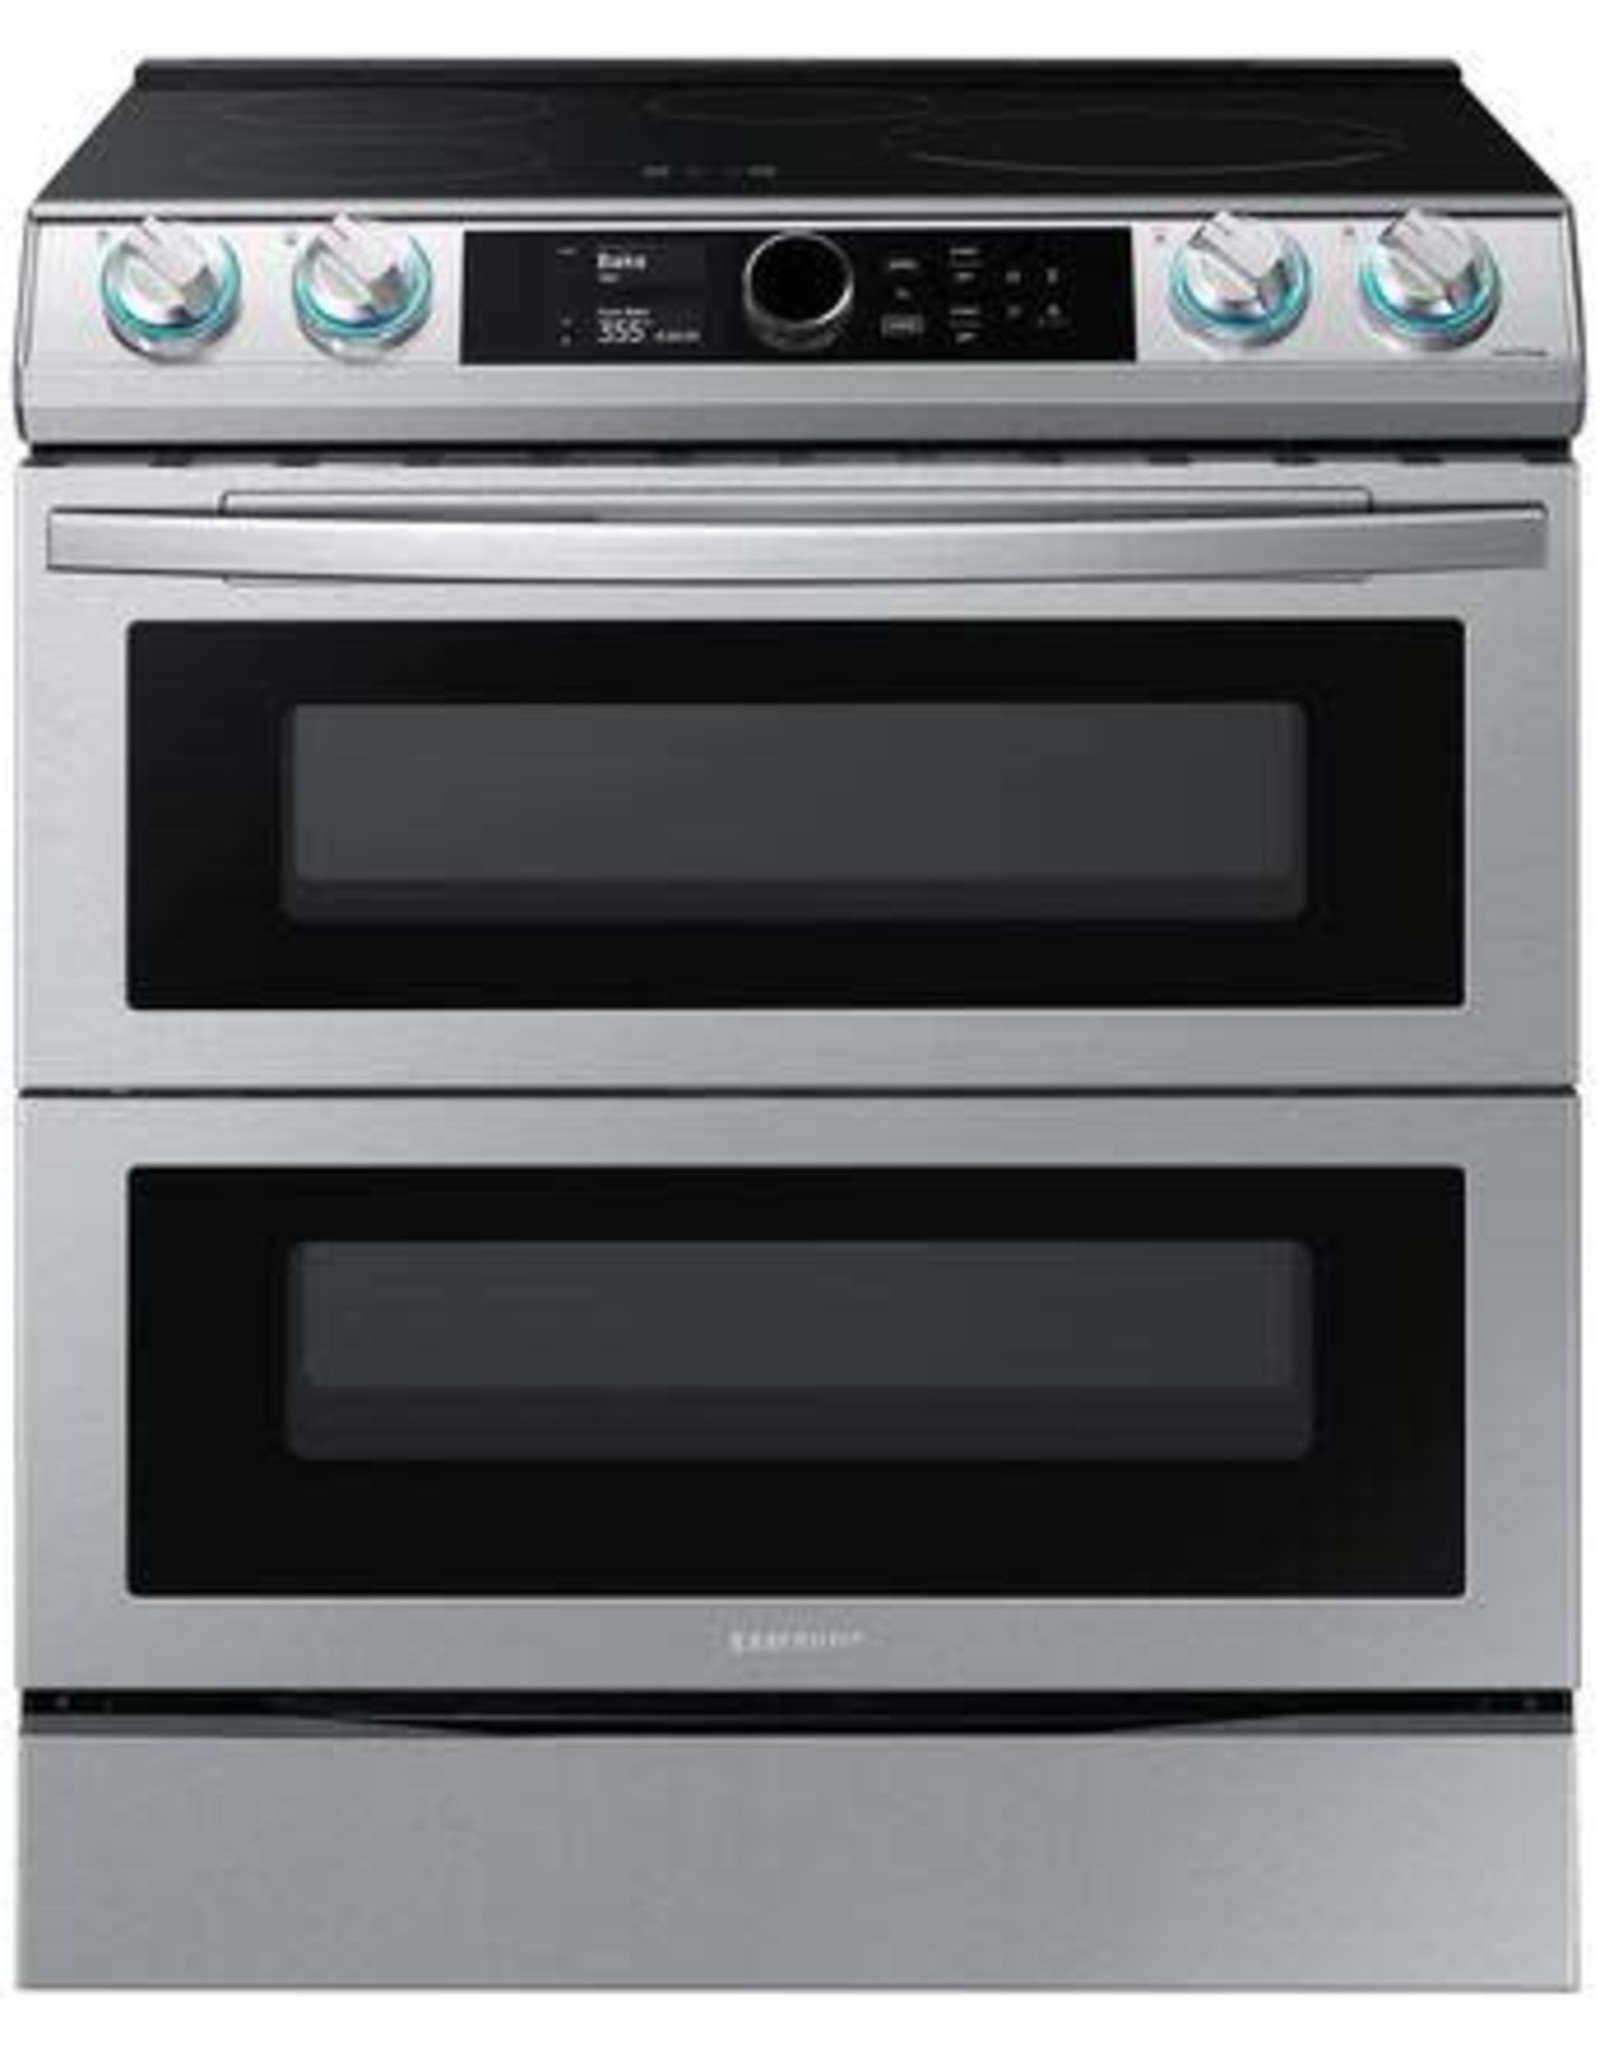 NEW NE63T8951SS 6.3 cu. ft. 4-Burner Slide-In Electric Induction Range with Air Fry in Fingerprint Resistant Stainless Steel by Samsung